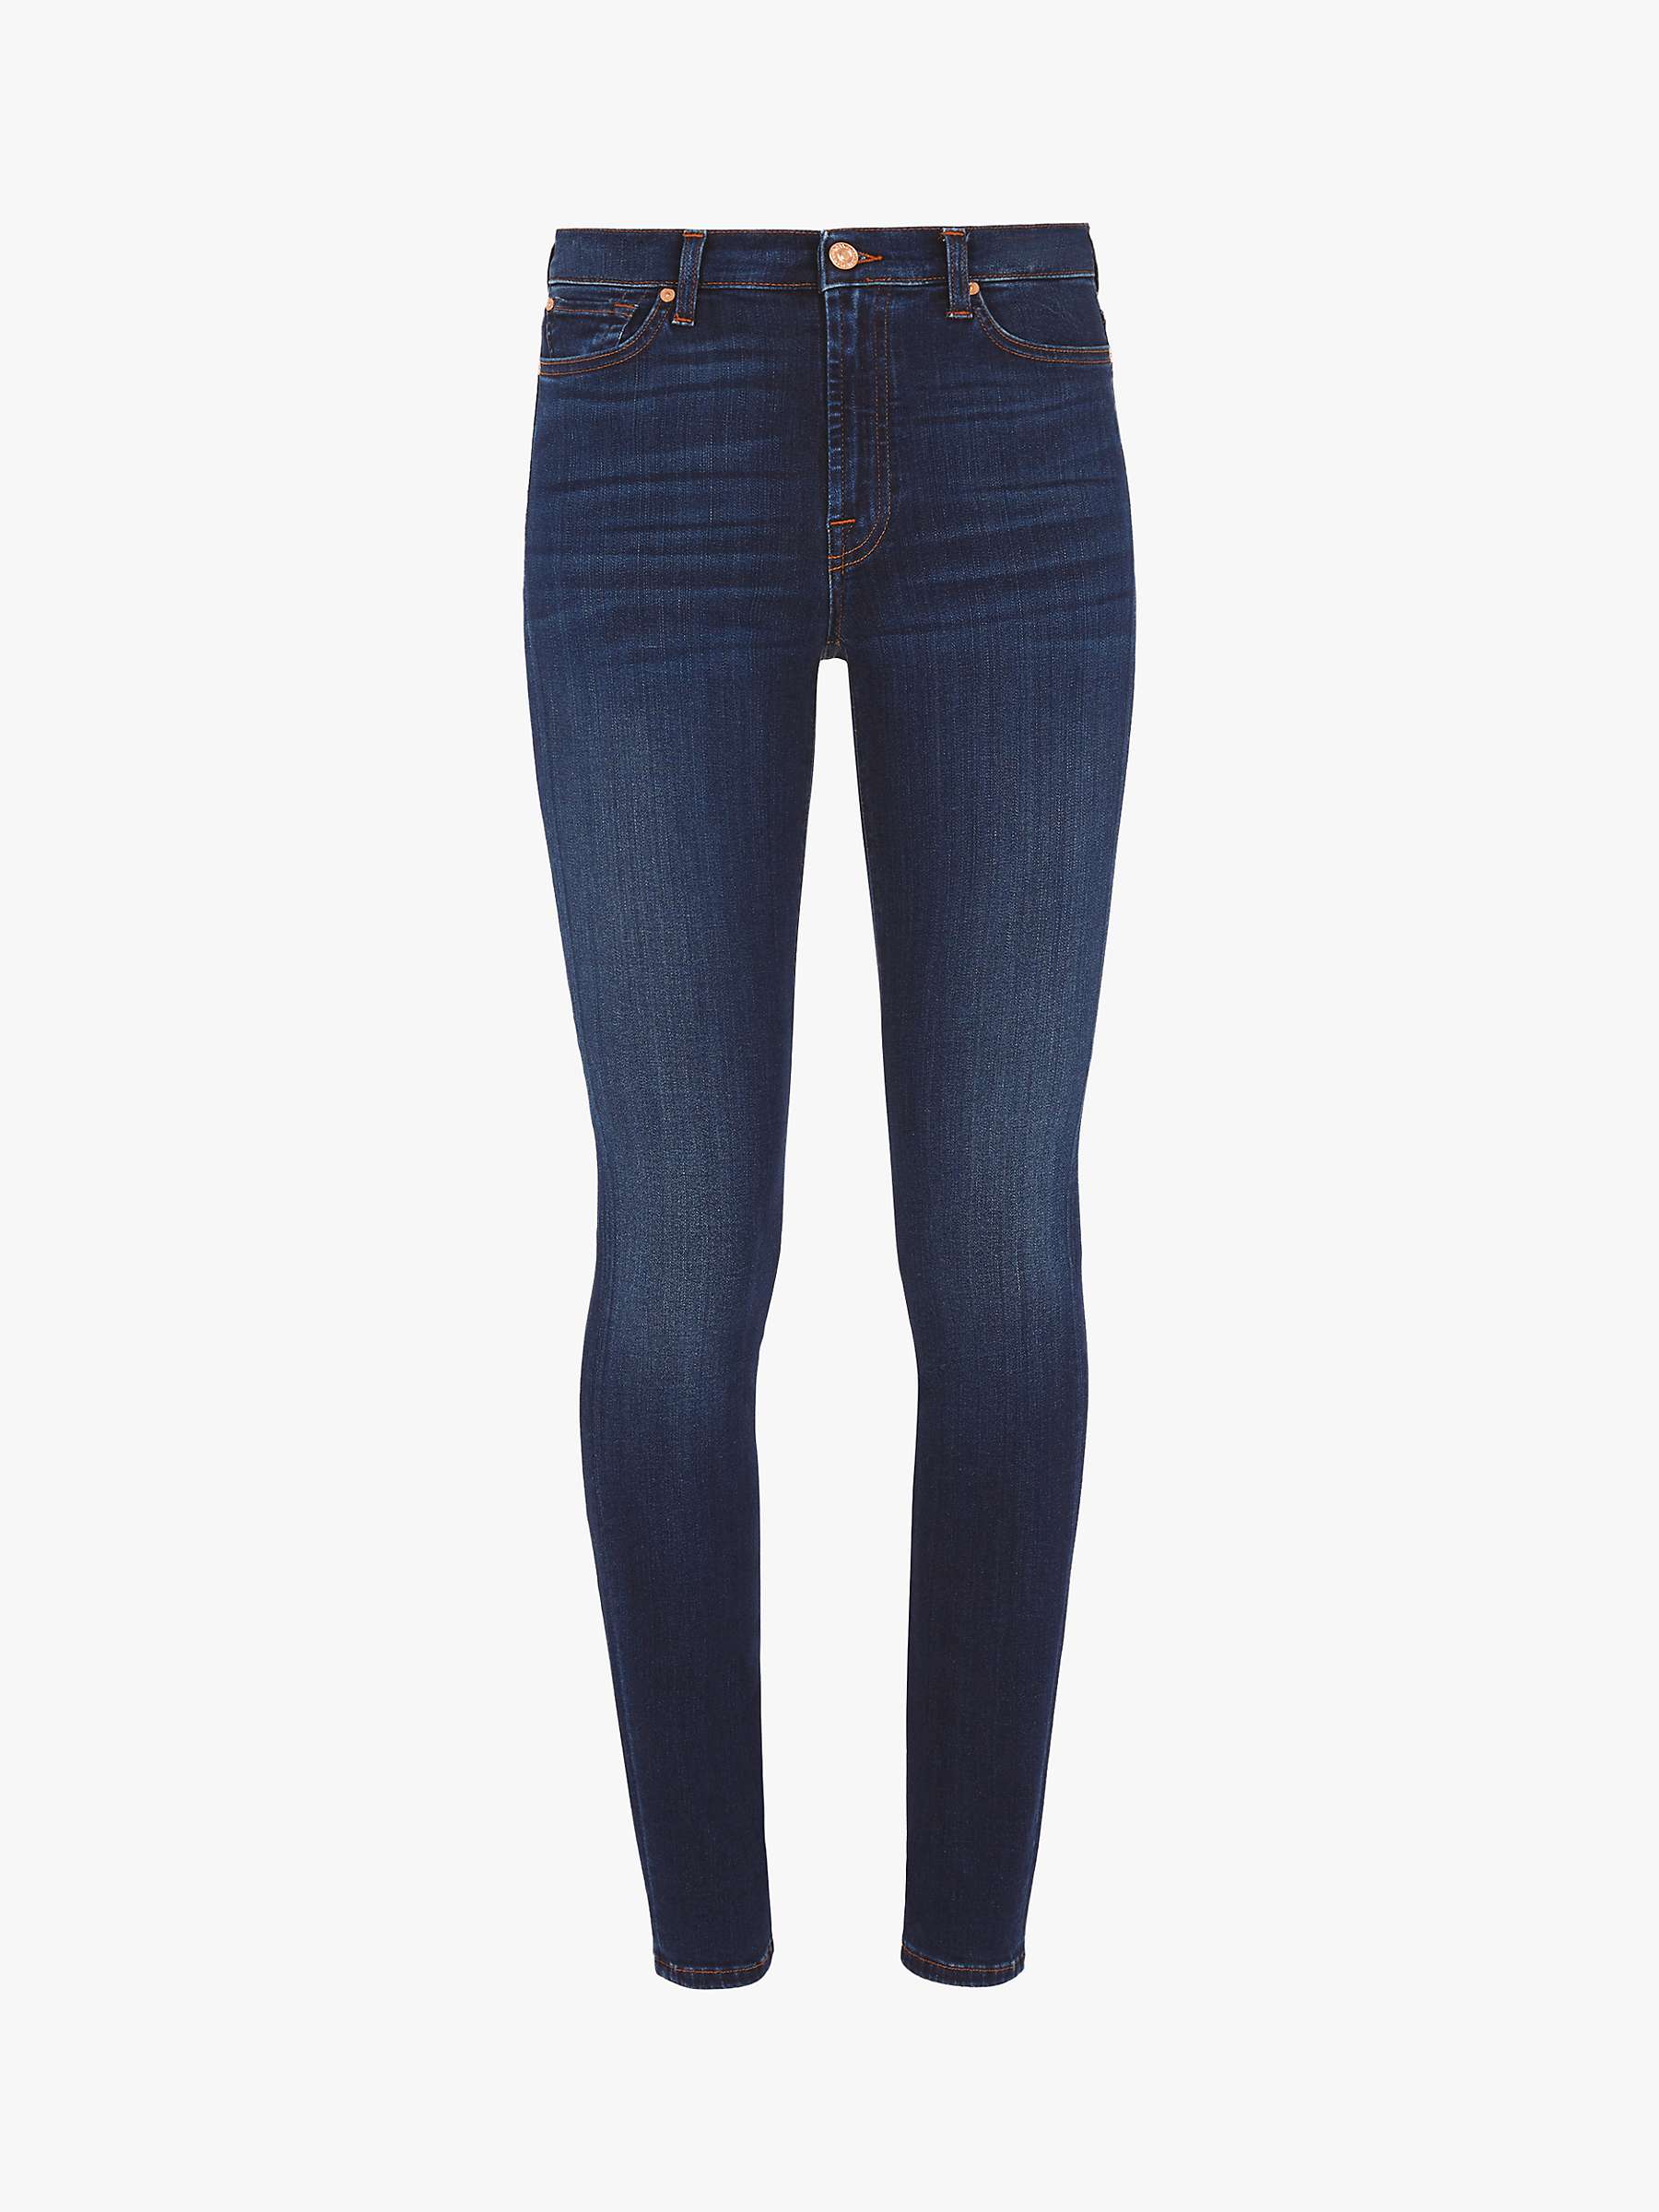 Buy 7 For All Mankind Skinny Slim Fit Jeans, Starlight Online at johnlewis.com